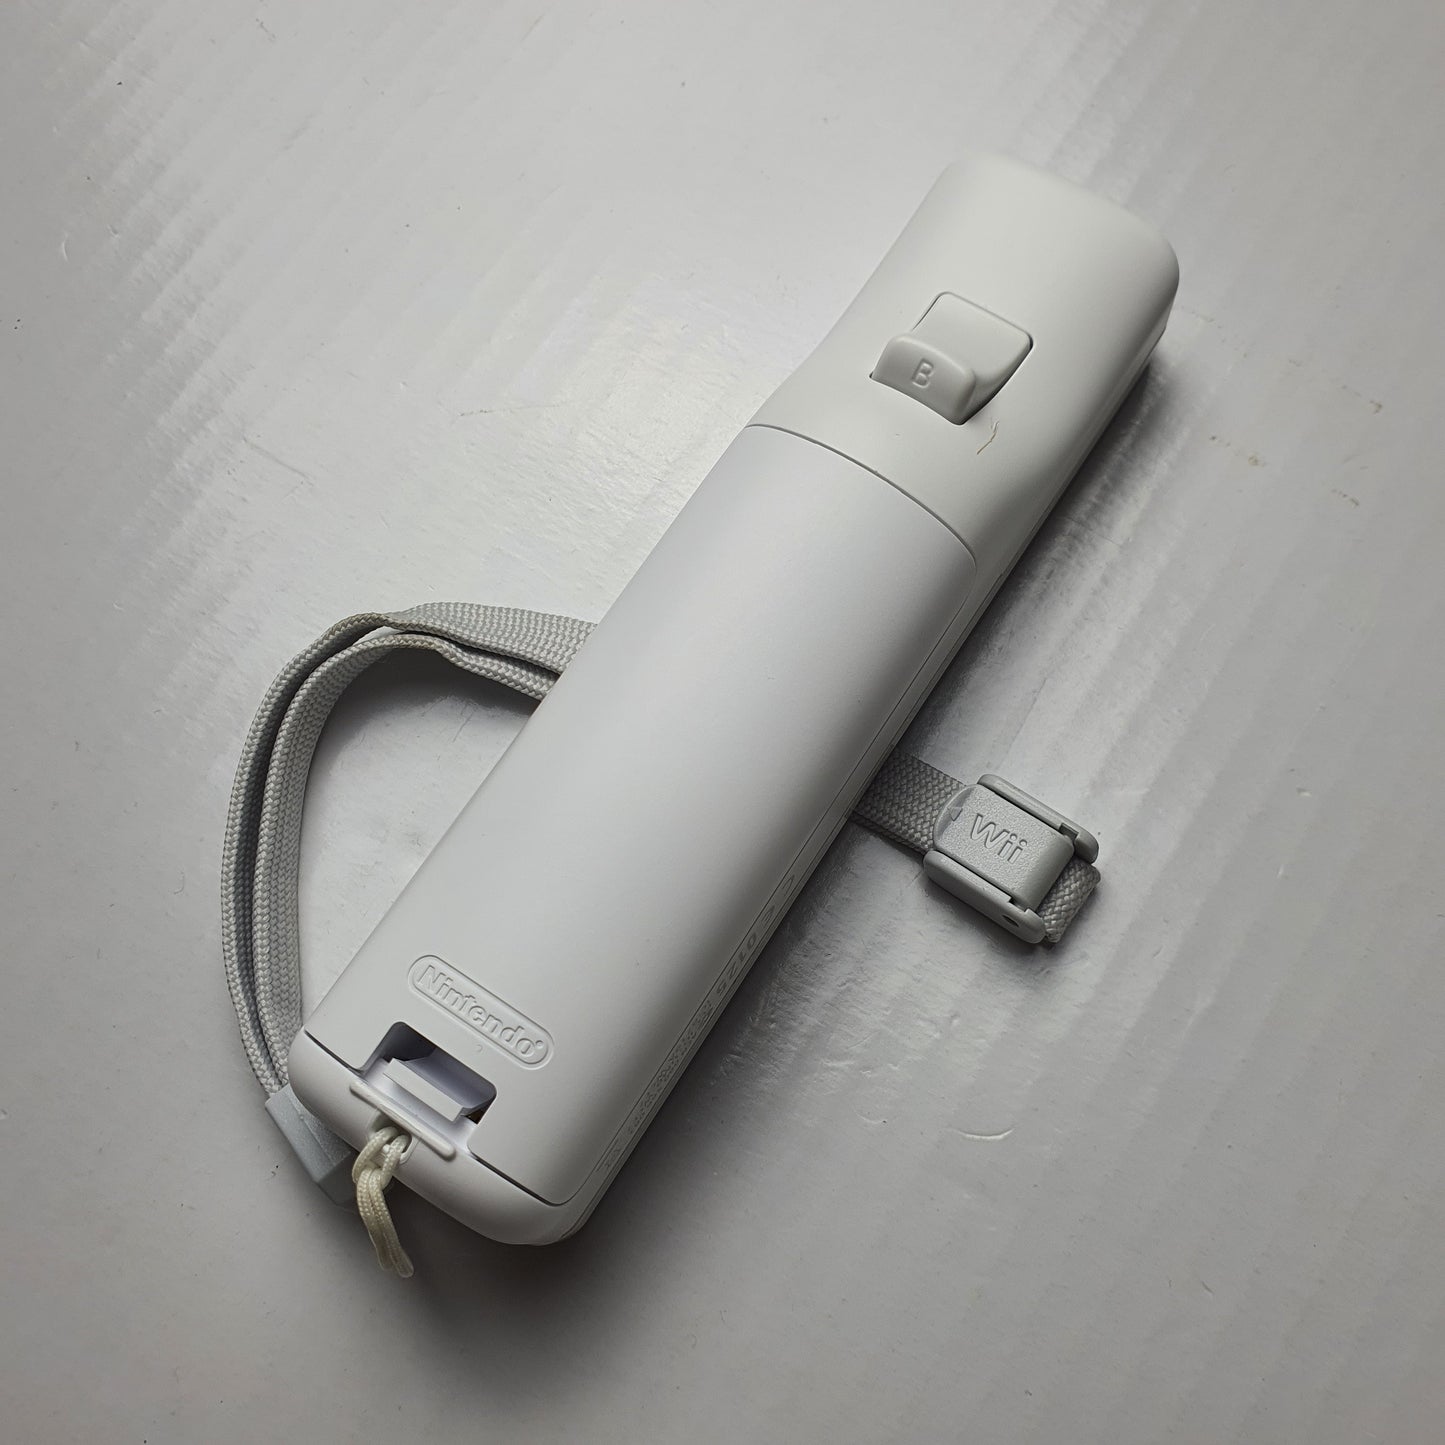 Wii Remote/Controller Bundle White - Includes Remote, Nunchuk, Motion Plus Adaptor, Protective Case